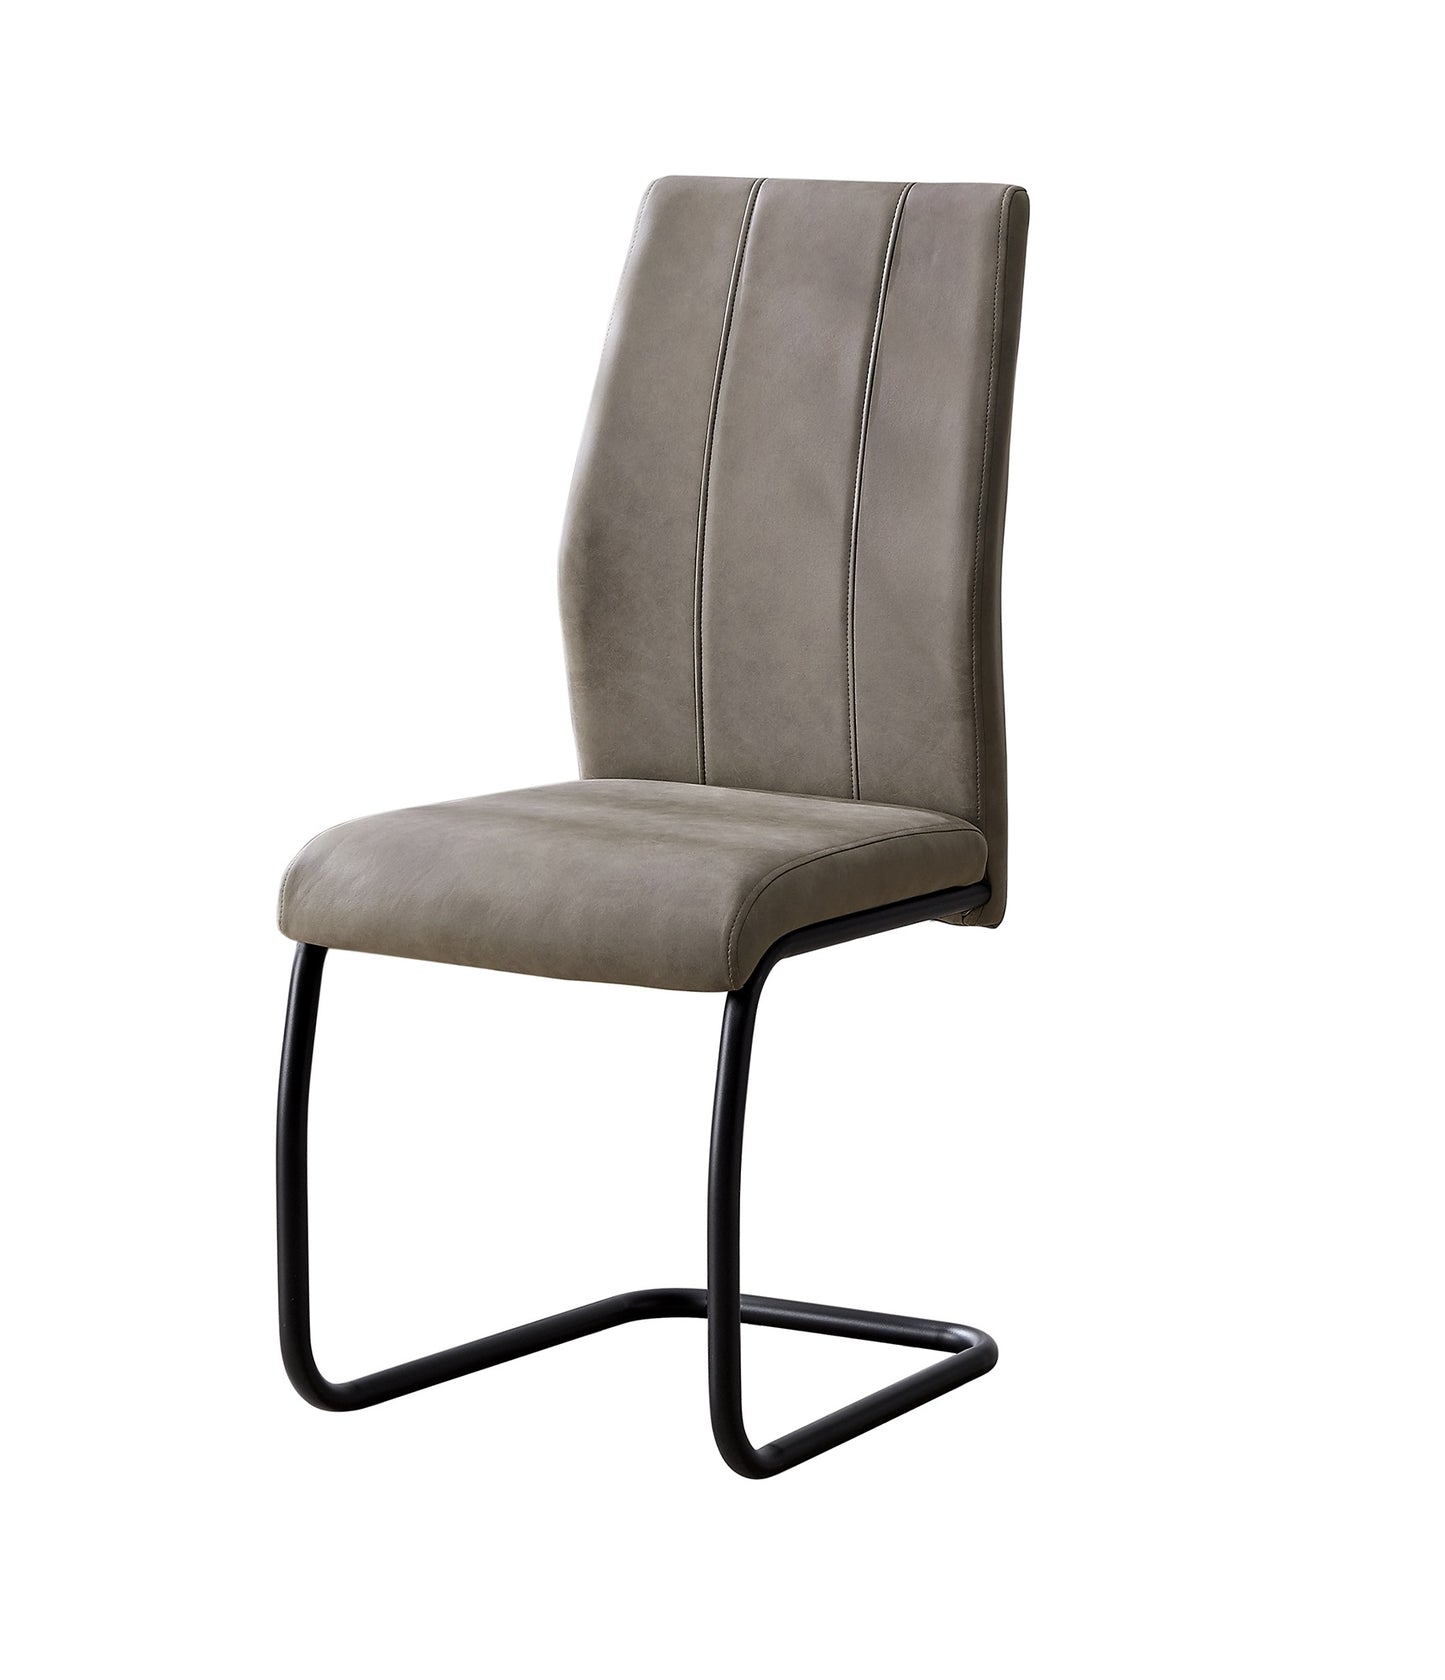 Set of Two Gray And Black Upholstered Polyester Dining Side Chairs